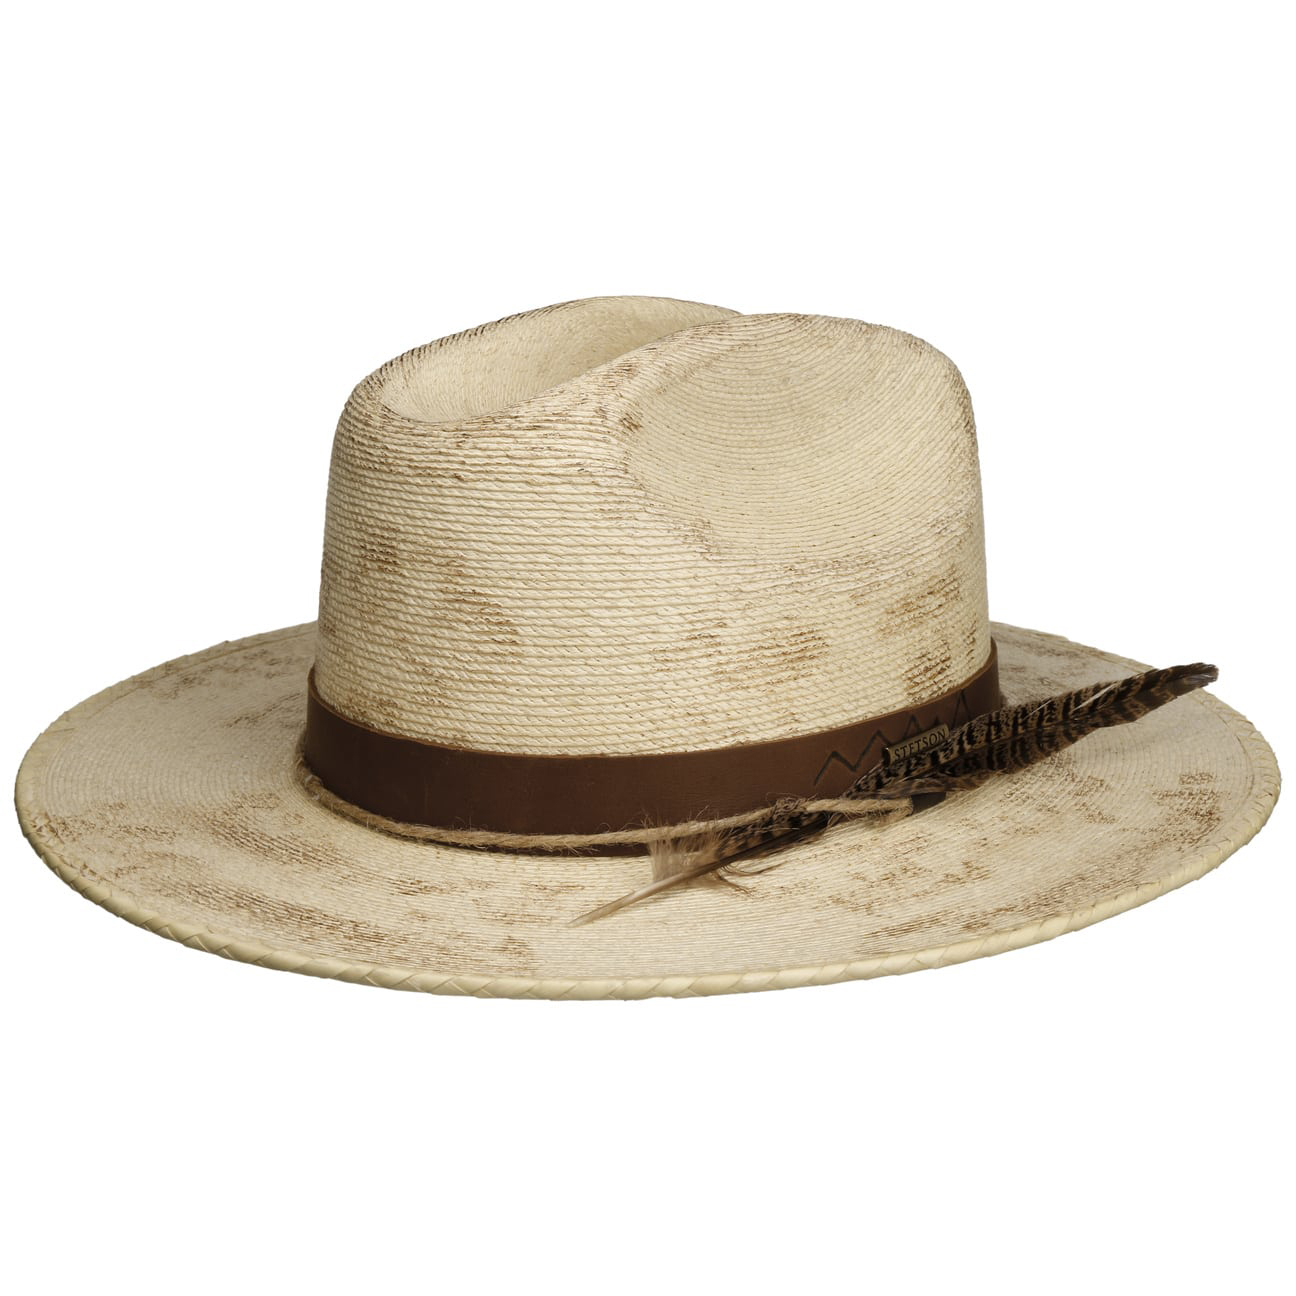 Stetson - Mexican Palm Straw Hat - Nature